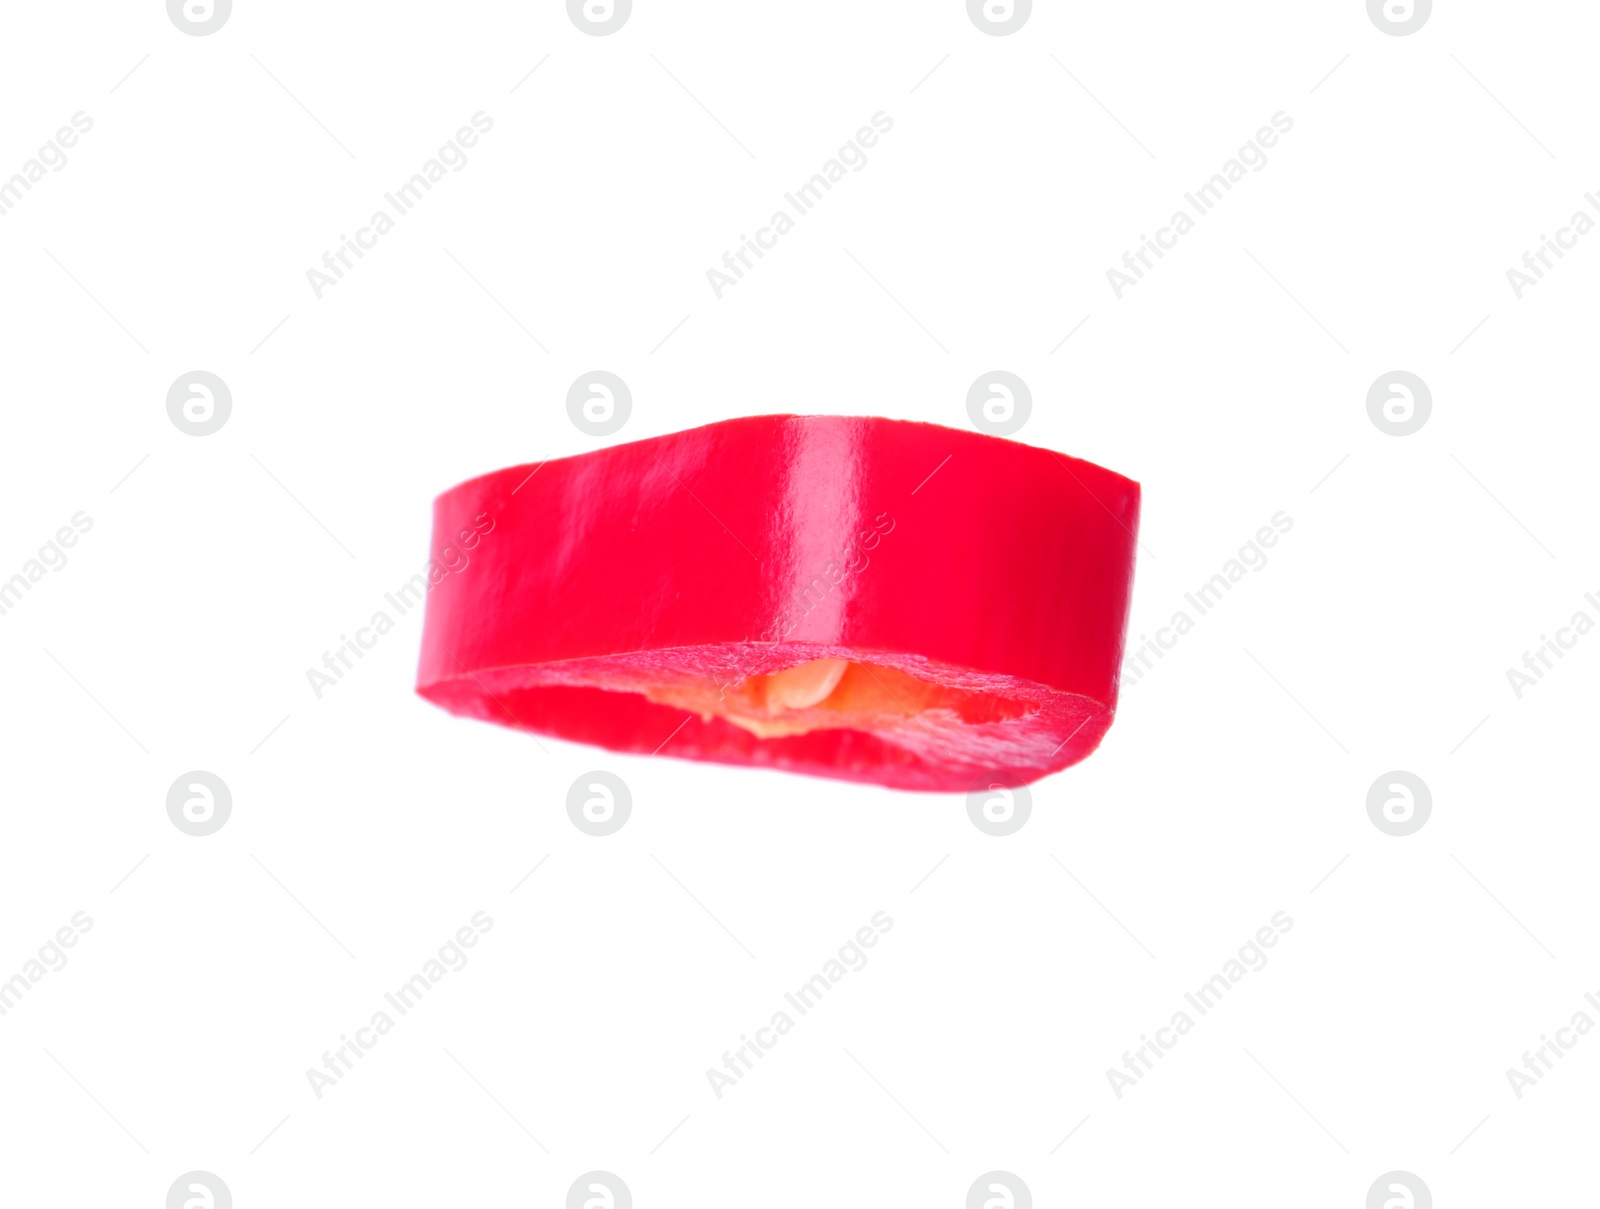 Photo of Cut red chili pepper on white background